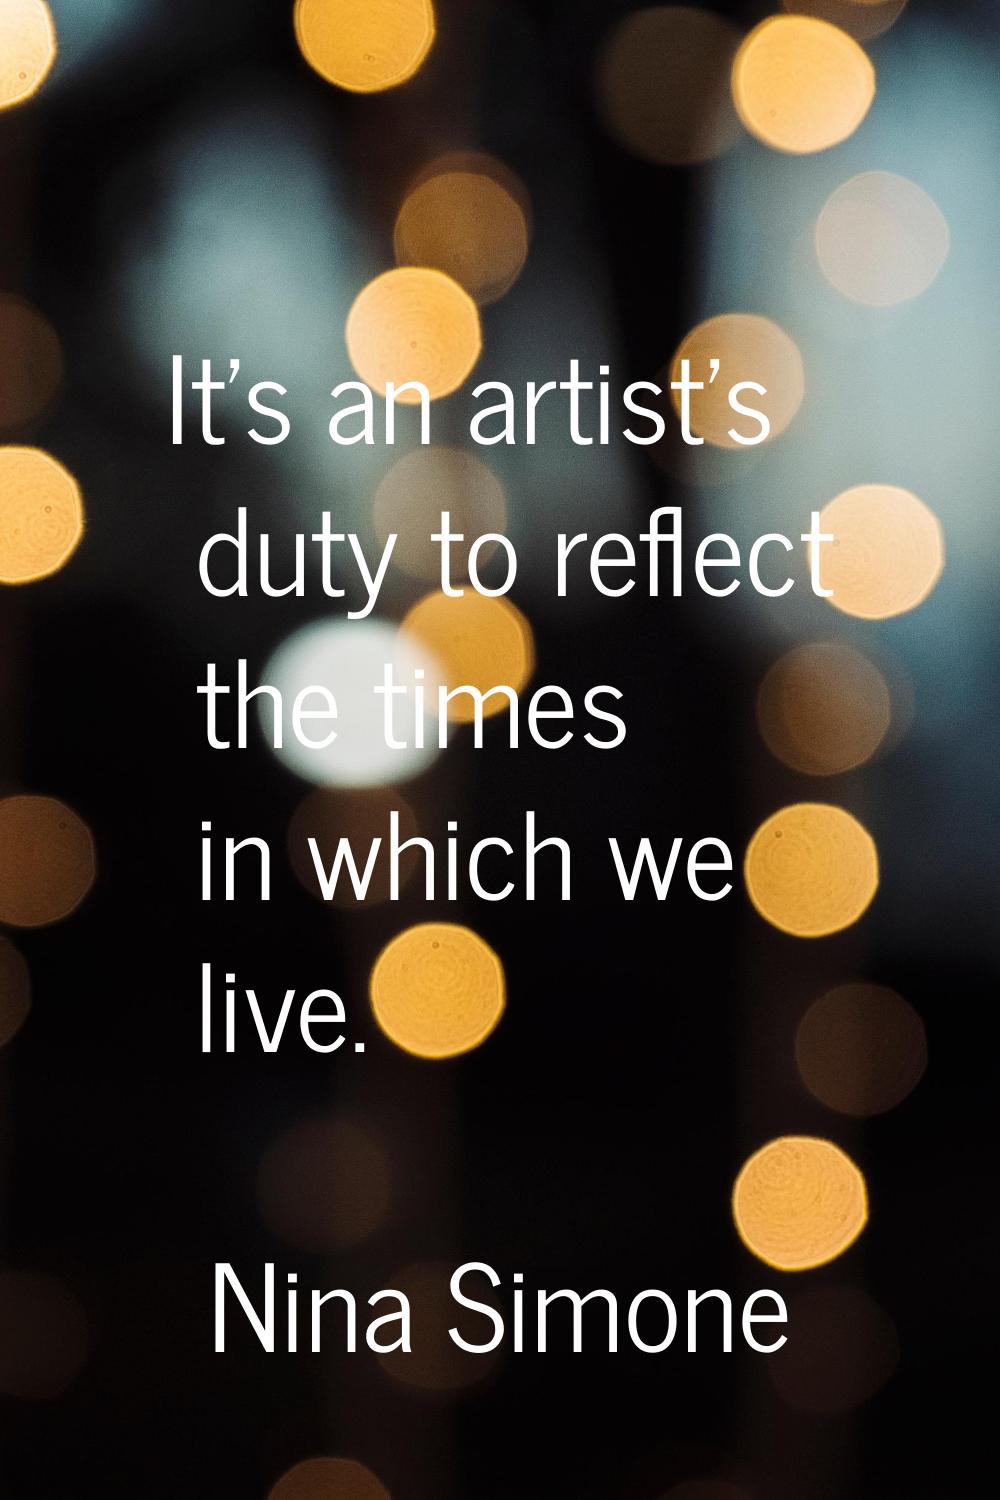 It's an artist's duty to reflect the times in which we live.